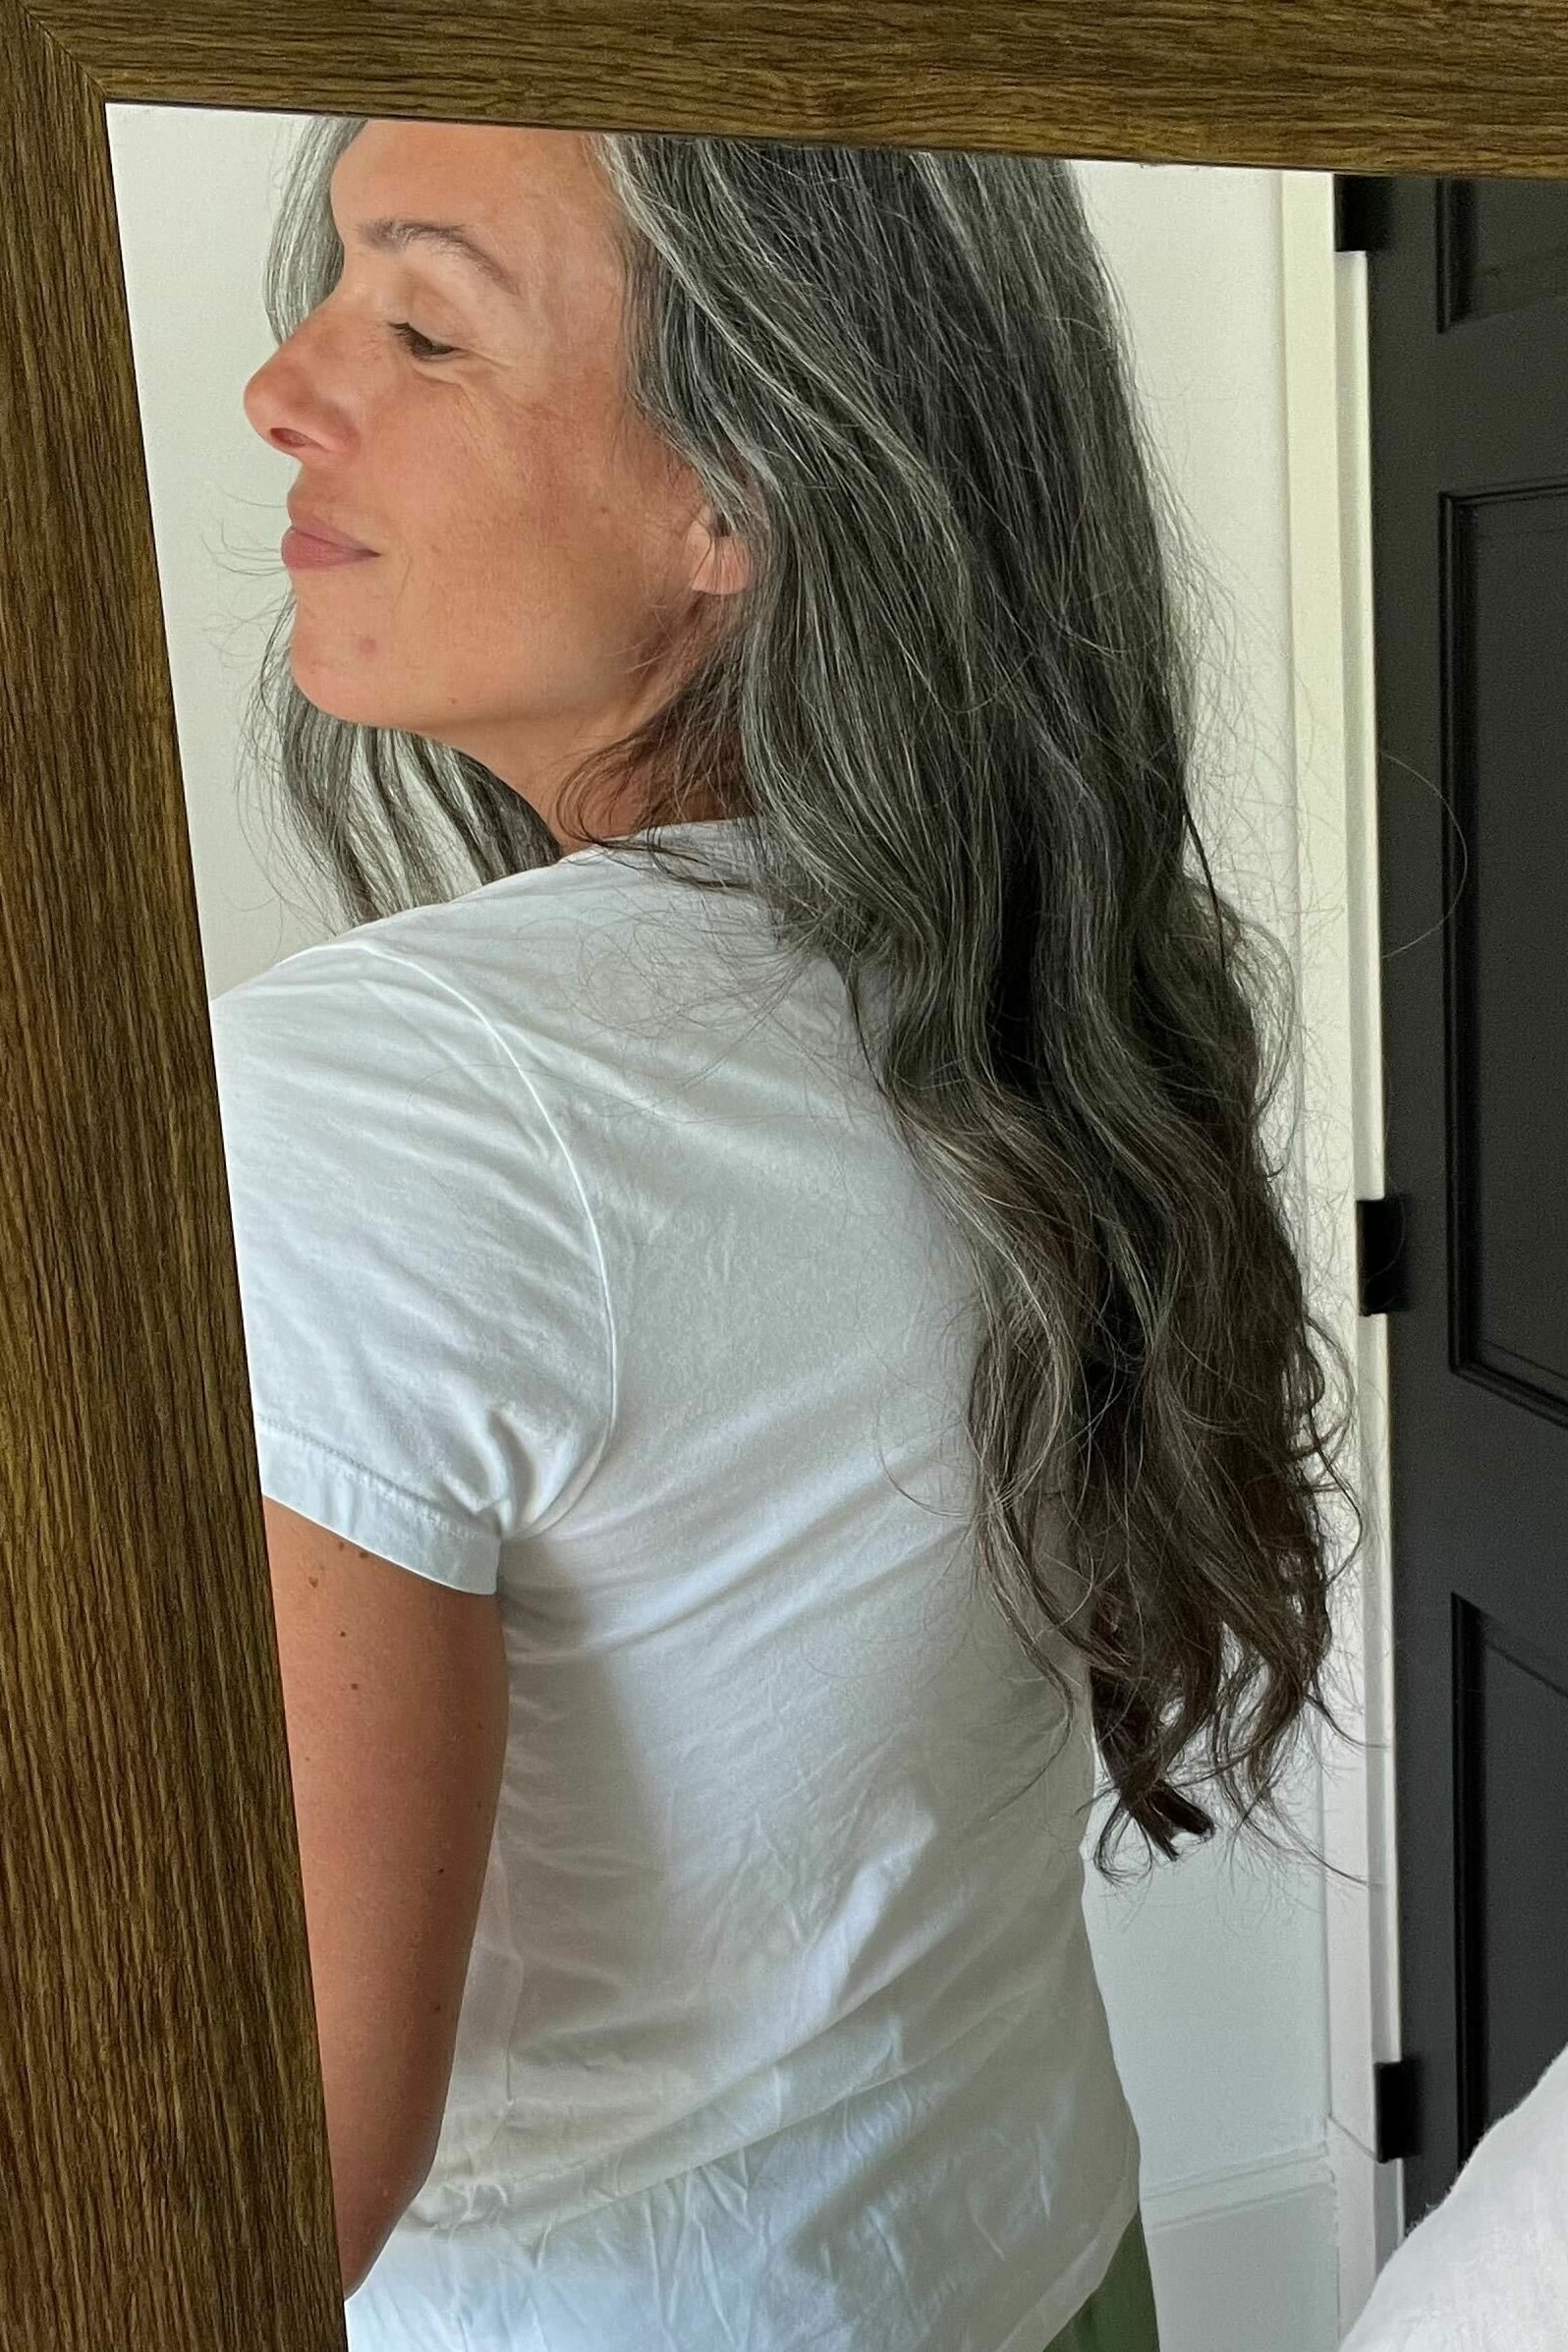 A woman with long gray hair wears a white t-shirt.